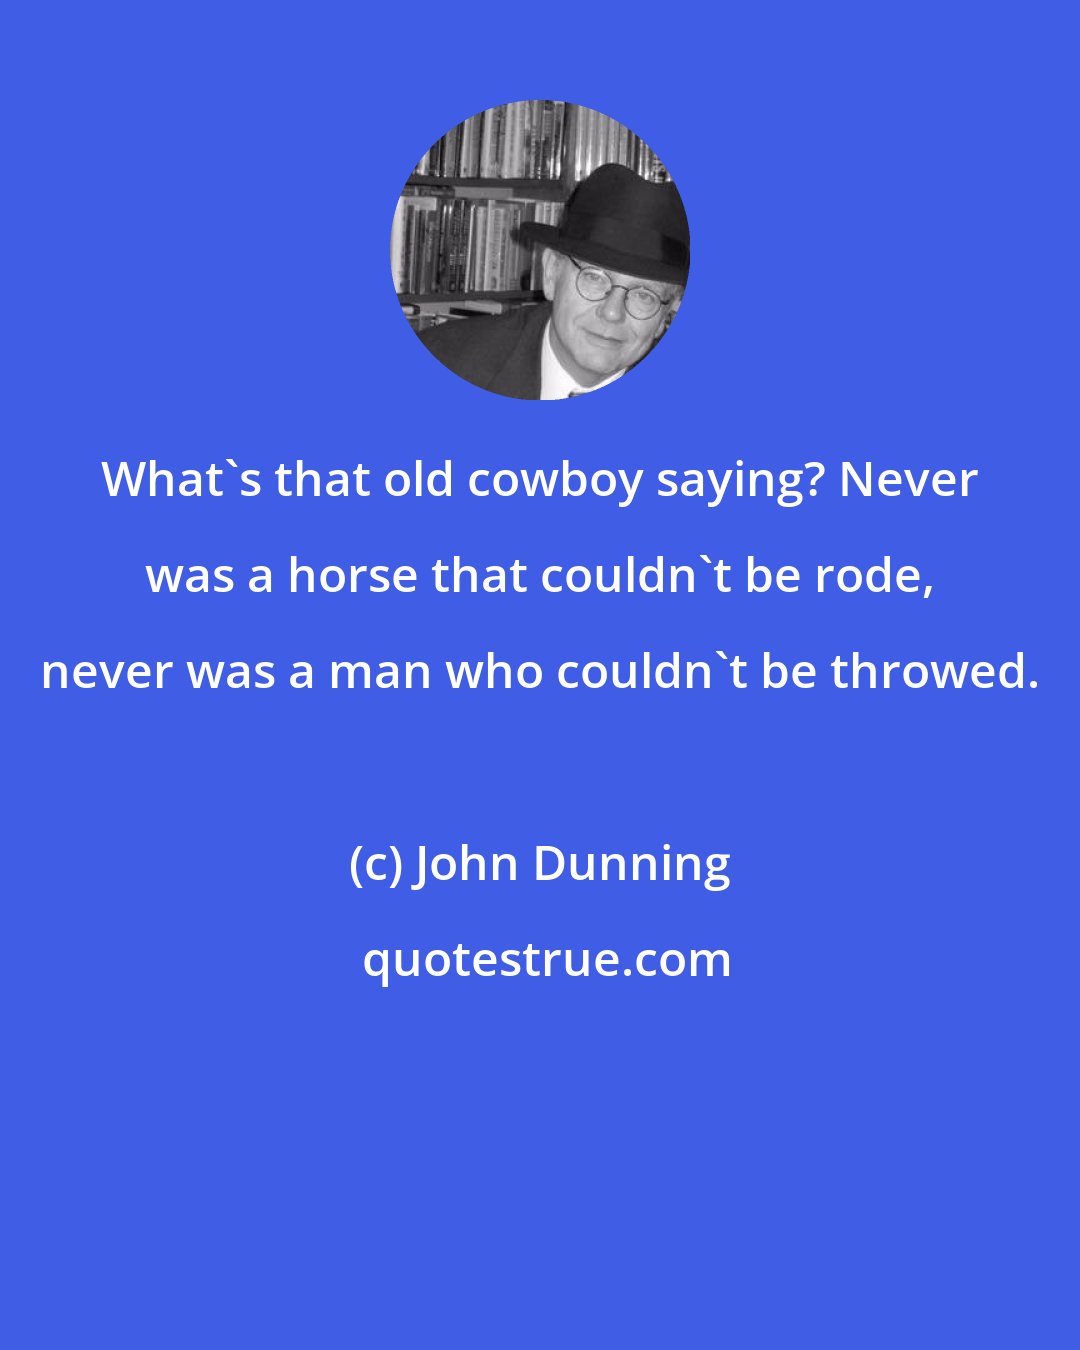 John Dunning: What's that old cowboy saying? Never was a horse that couldn't be rode, never was a man who couldn't be throwed.